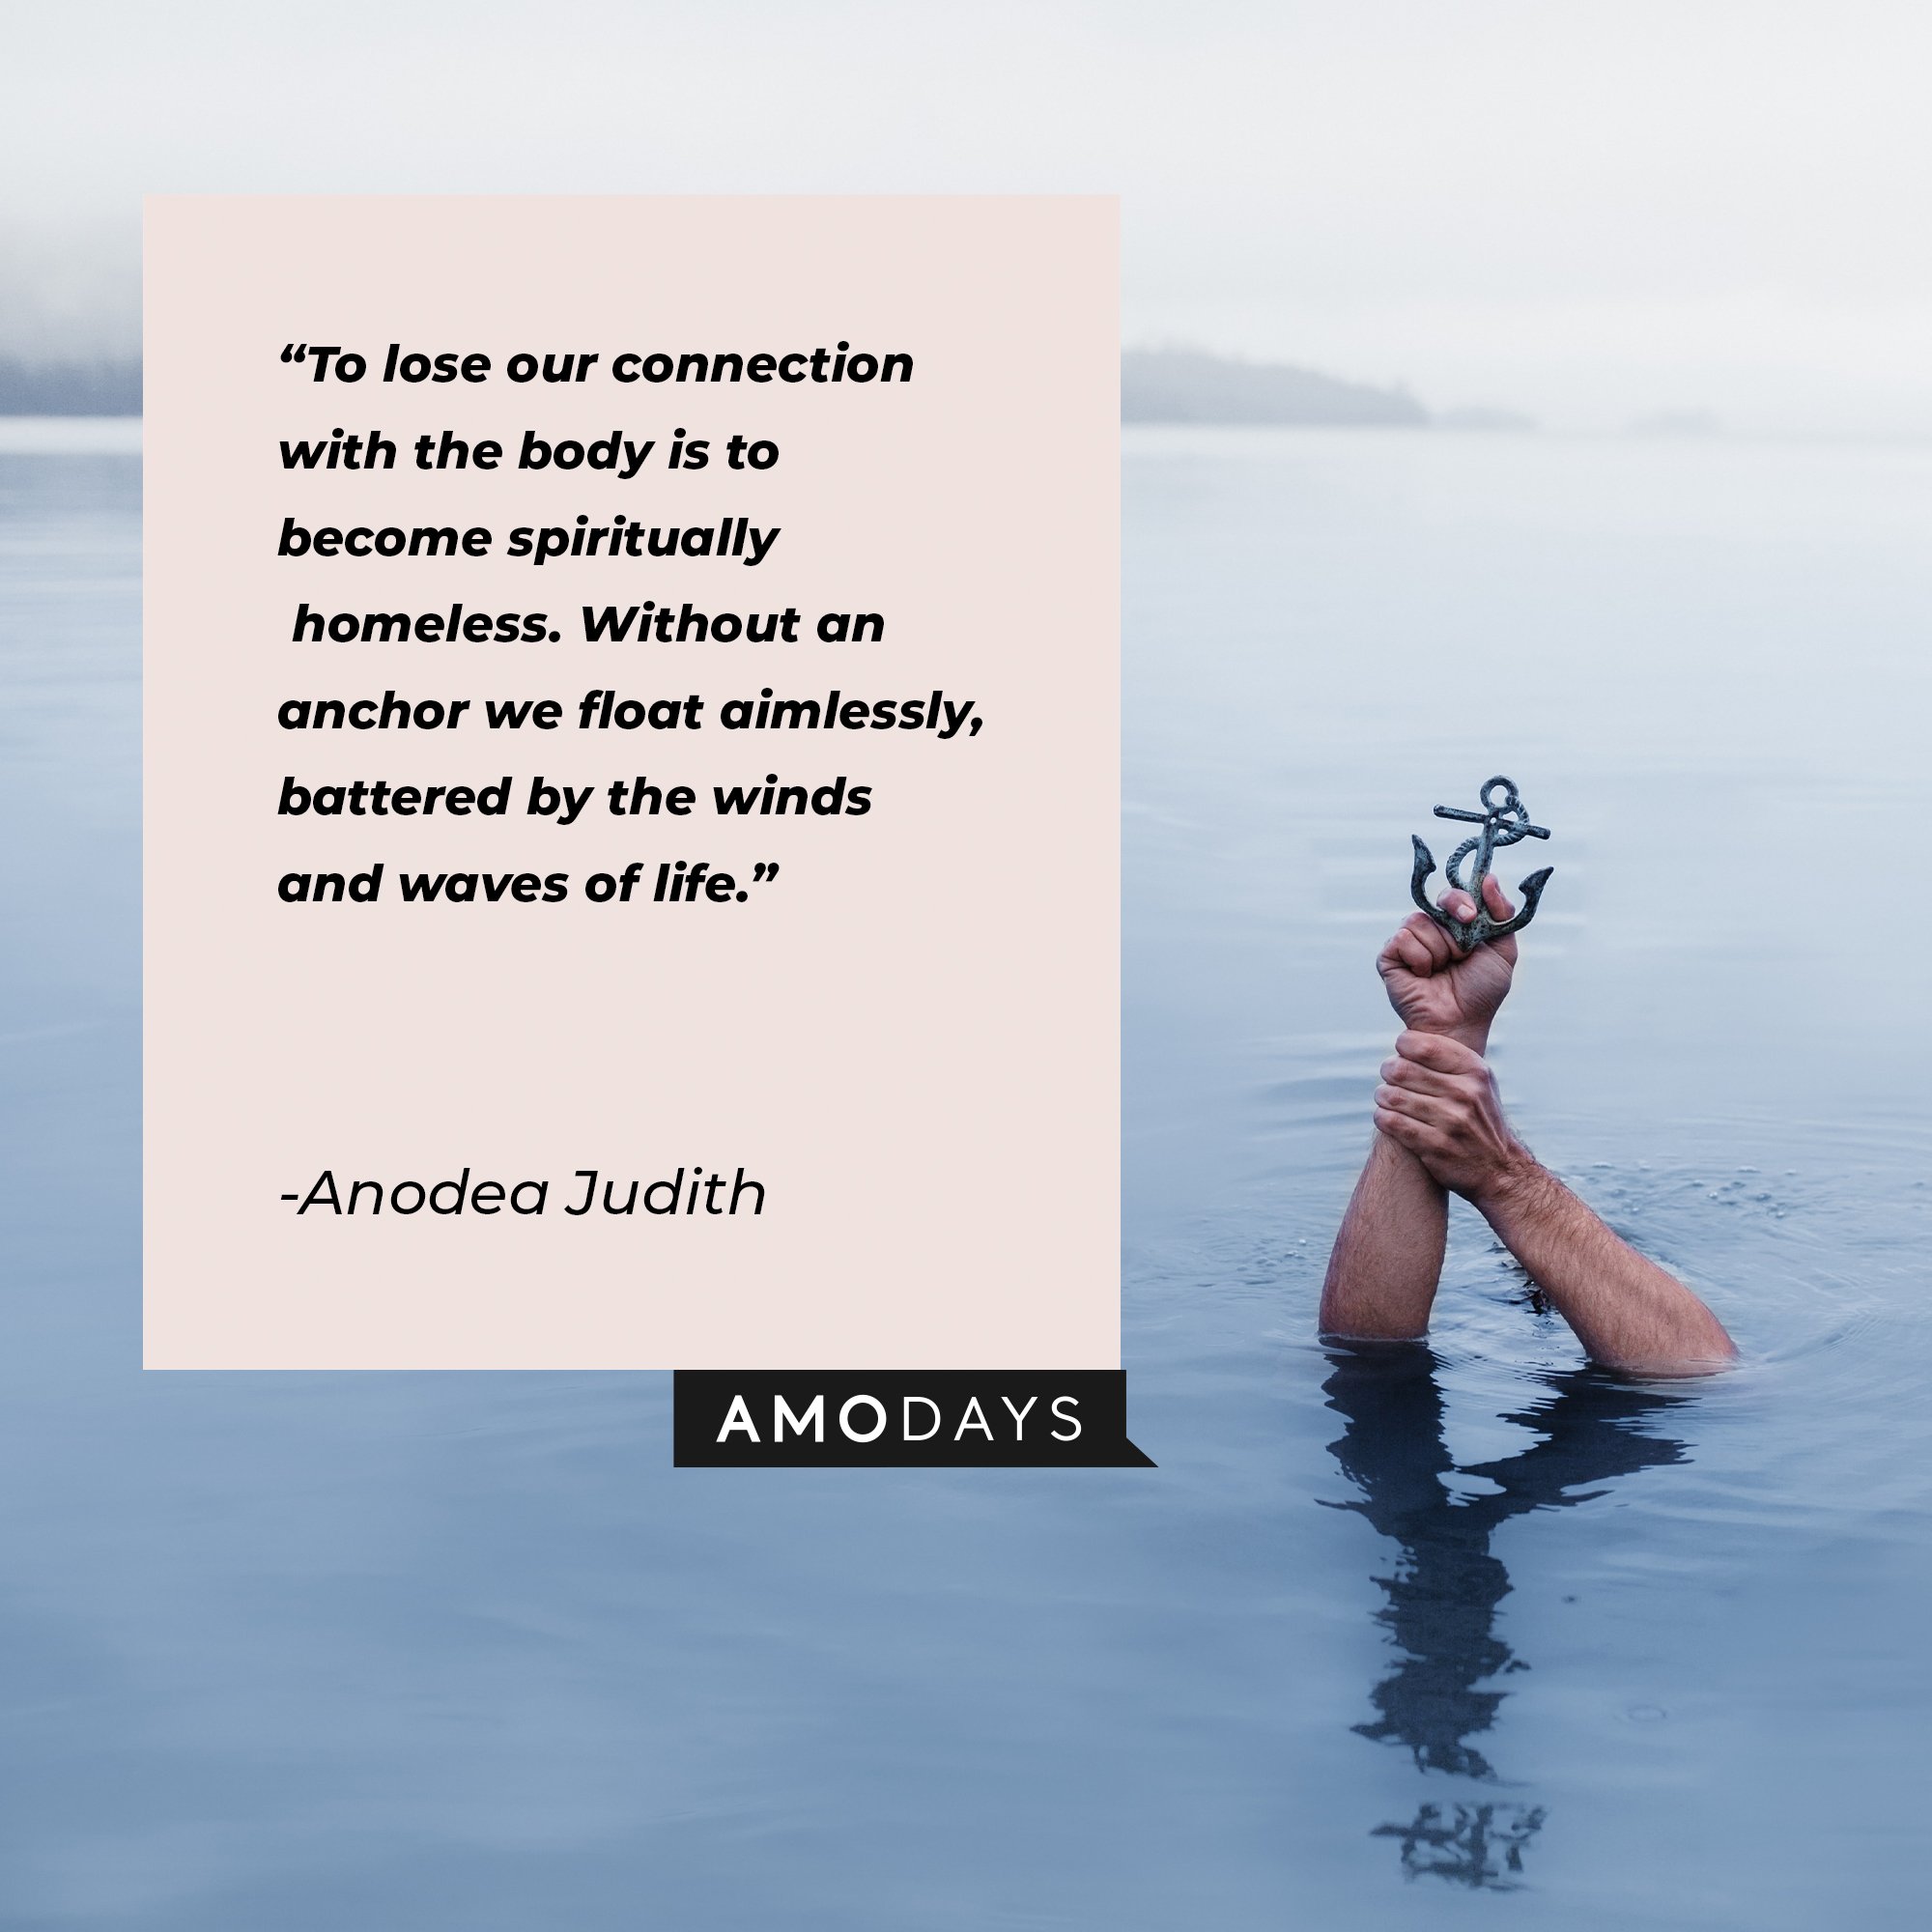 Anodea Judith's quote: "To lose our connection with the body is to become spiritually homeless. Without an anchor we float aimlessly, battered by the winds and waves of life." | Image: AmoDays